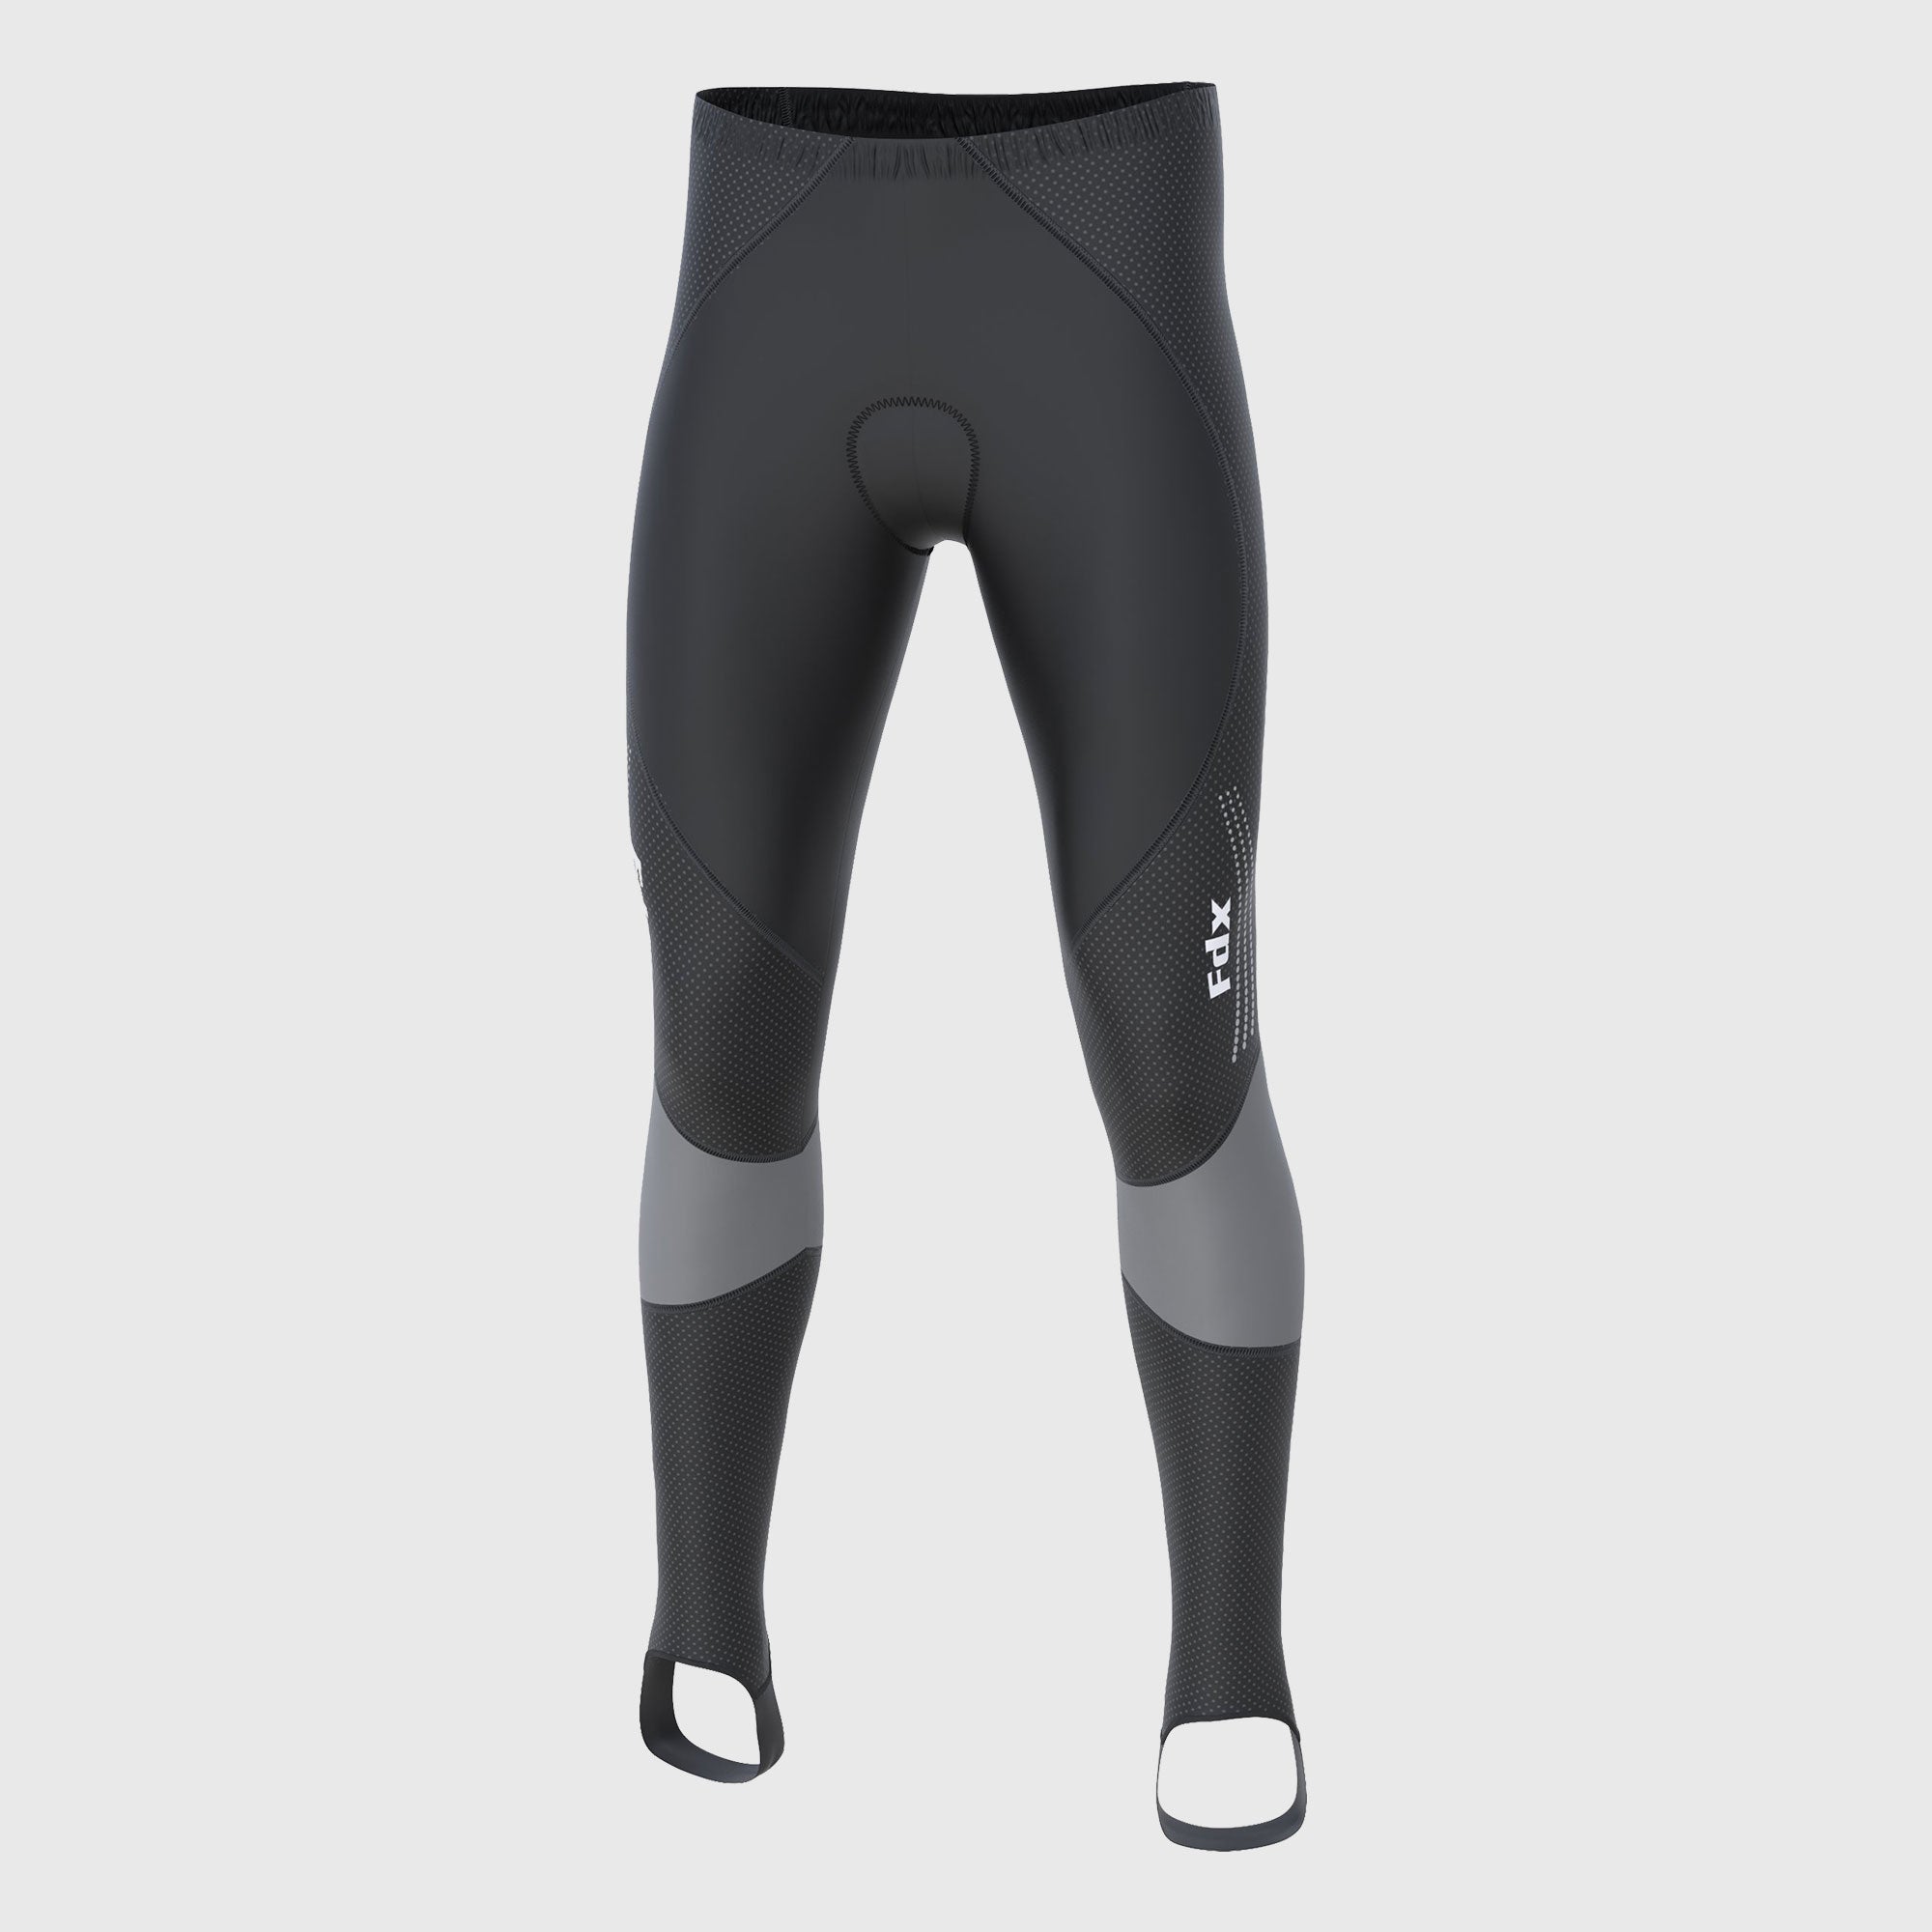 FDX All Day Mens Cycling Tights - 3D Padded Winter Thermal Long Cycle Pants  - Breathable, Quick Dry Outdoor Bike Riding Leggings - Cold Wear